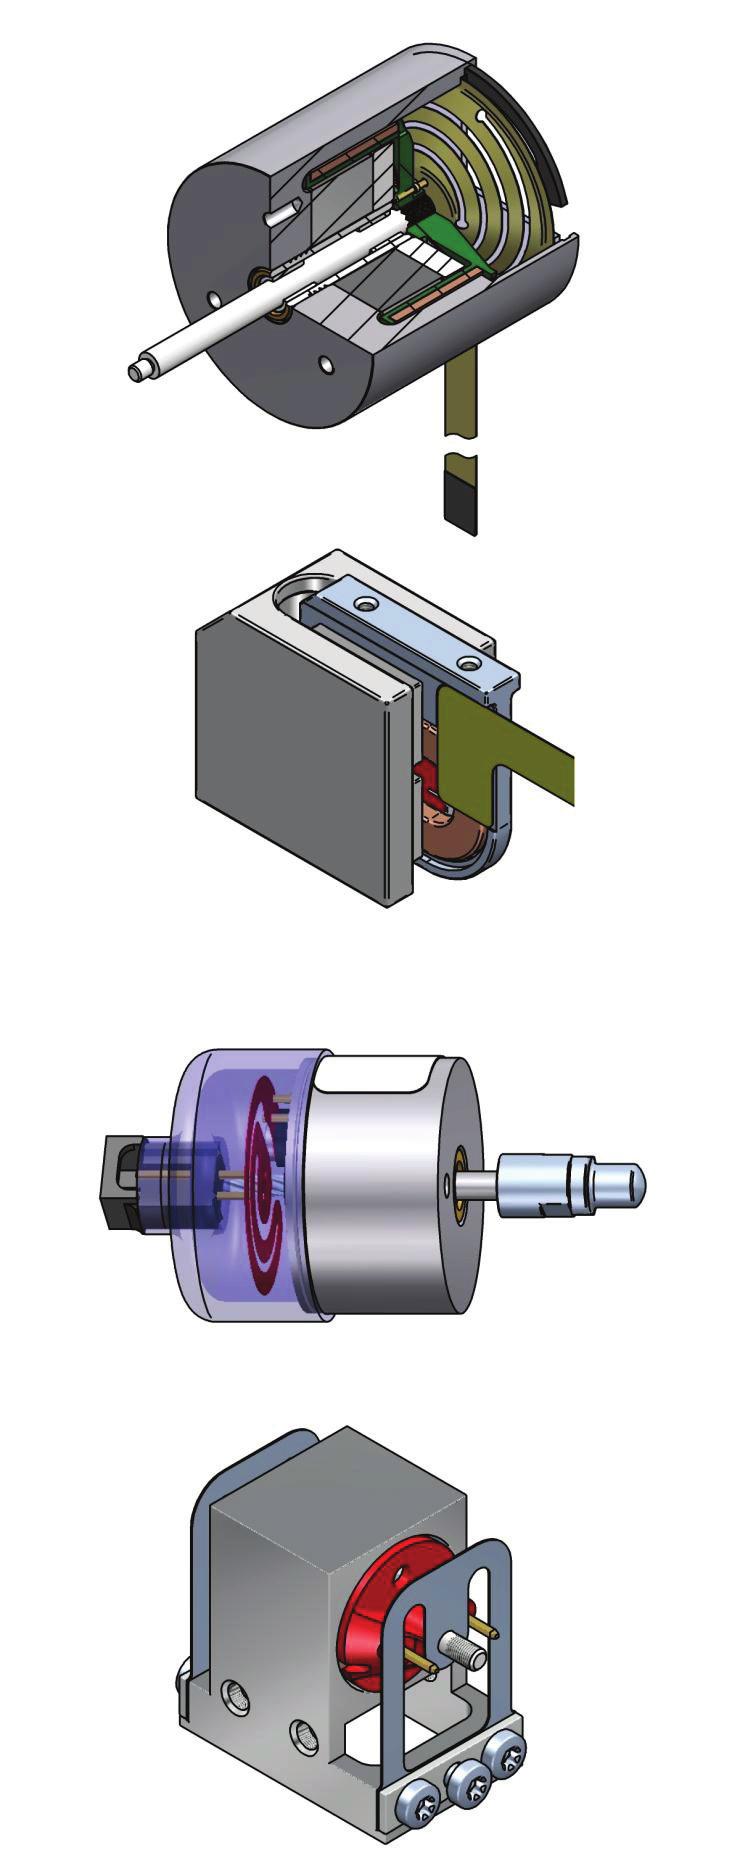 Custom Designs Custom designs can incorporate many different features including the following : Flexible circuit termination of the coil provides reliable electrical connection with repeatable low